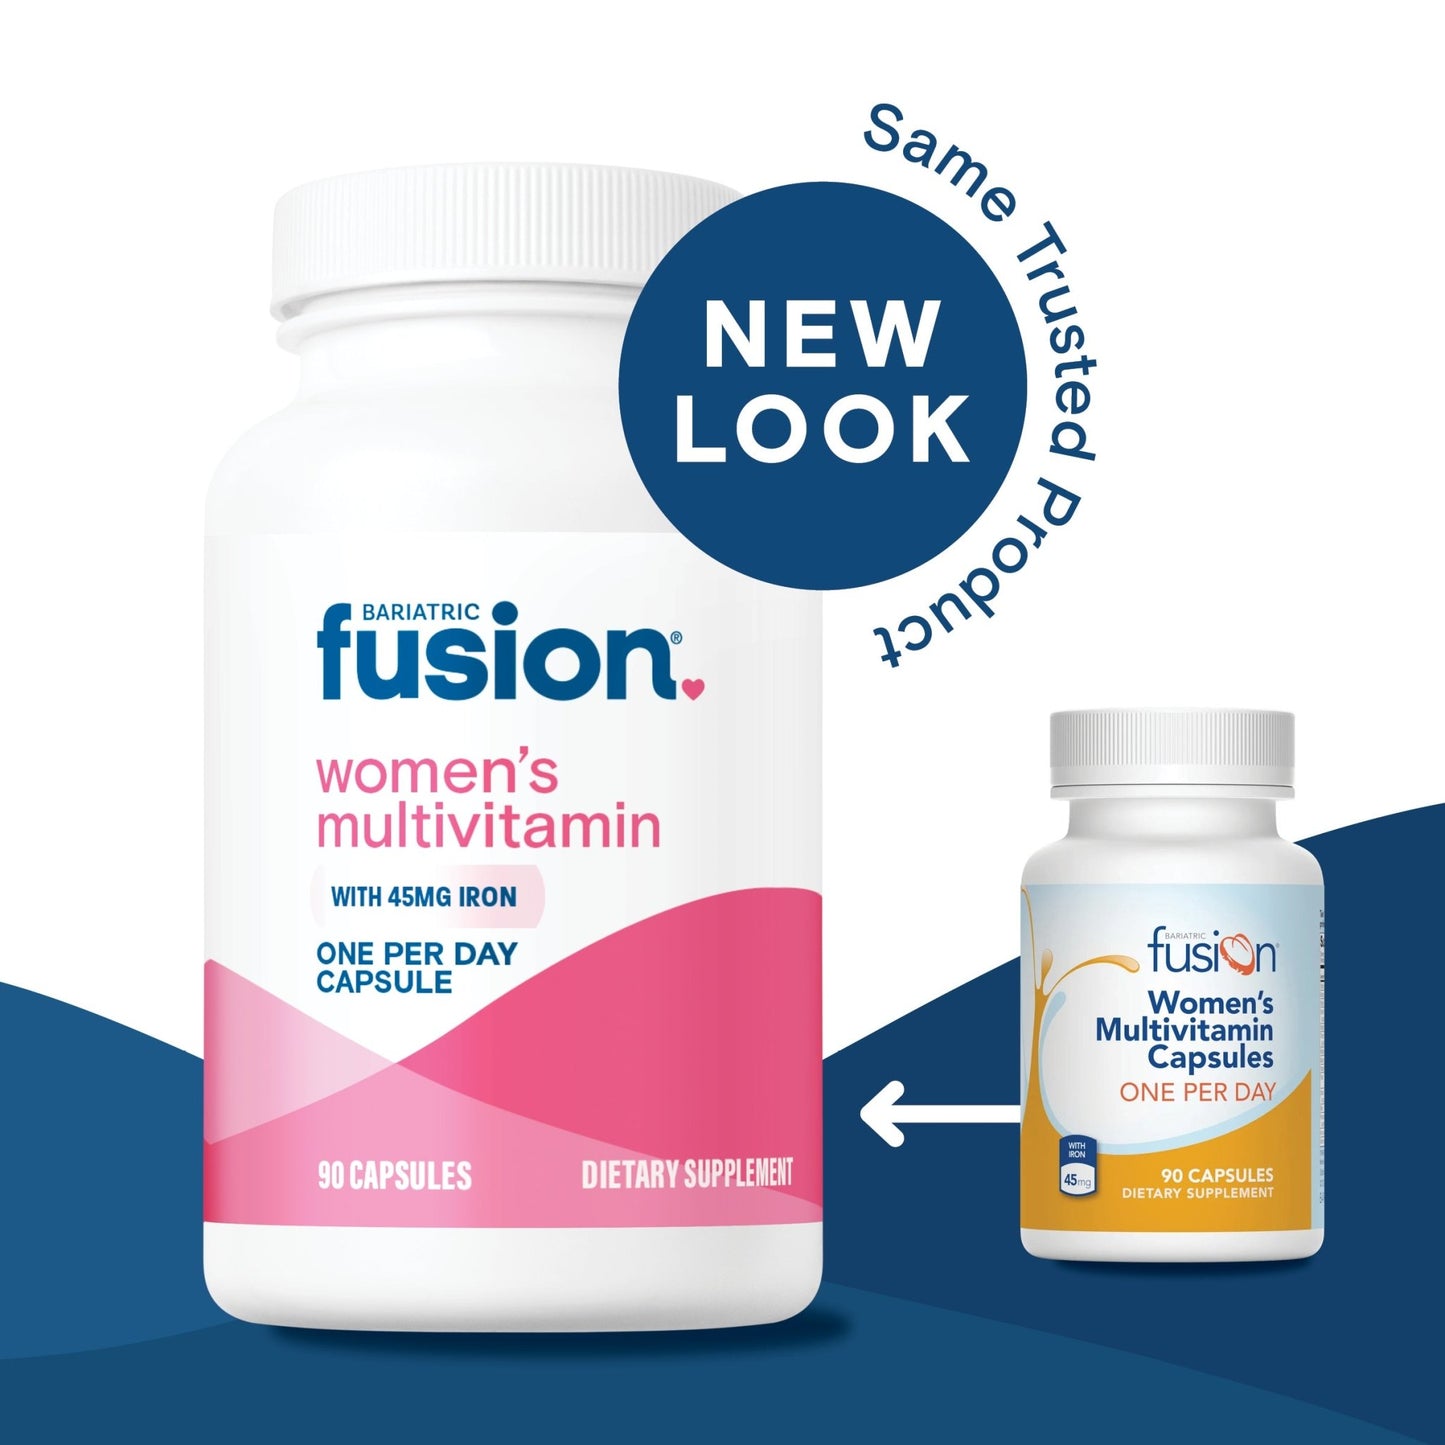 Women’s One Per Day Multivitamin With Iron 90 capsules new look, same trusted product.